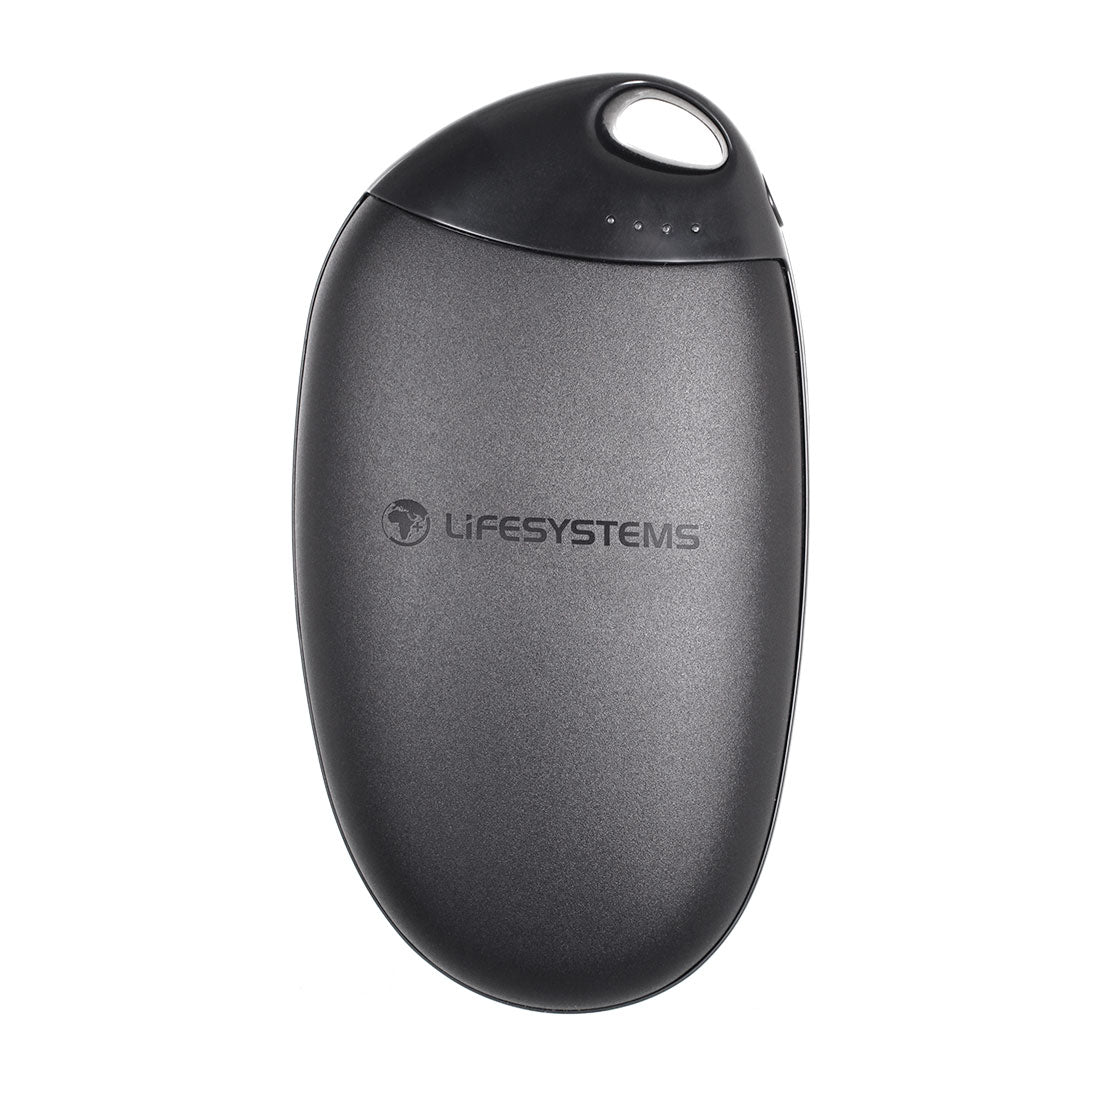 Rechargeable Hand Warmer - variant[5200mAh]